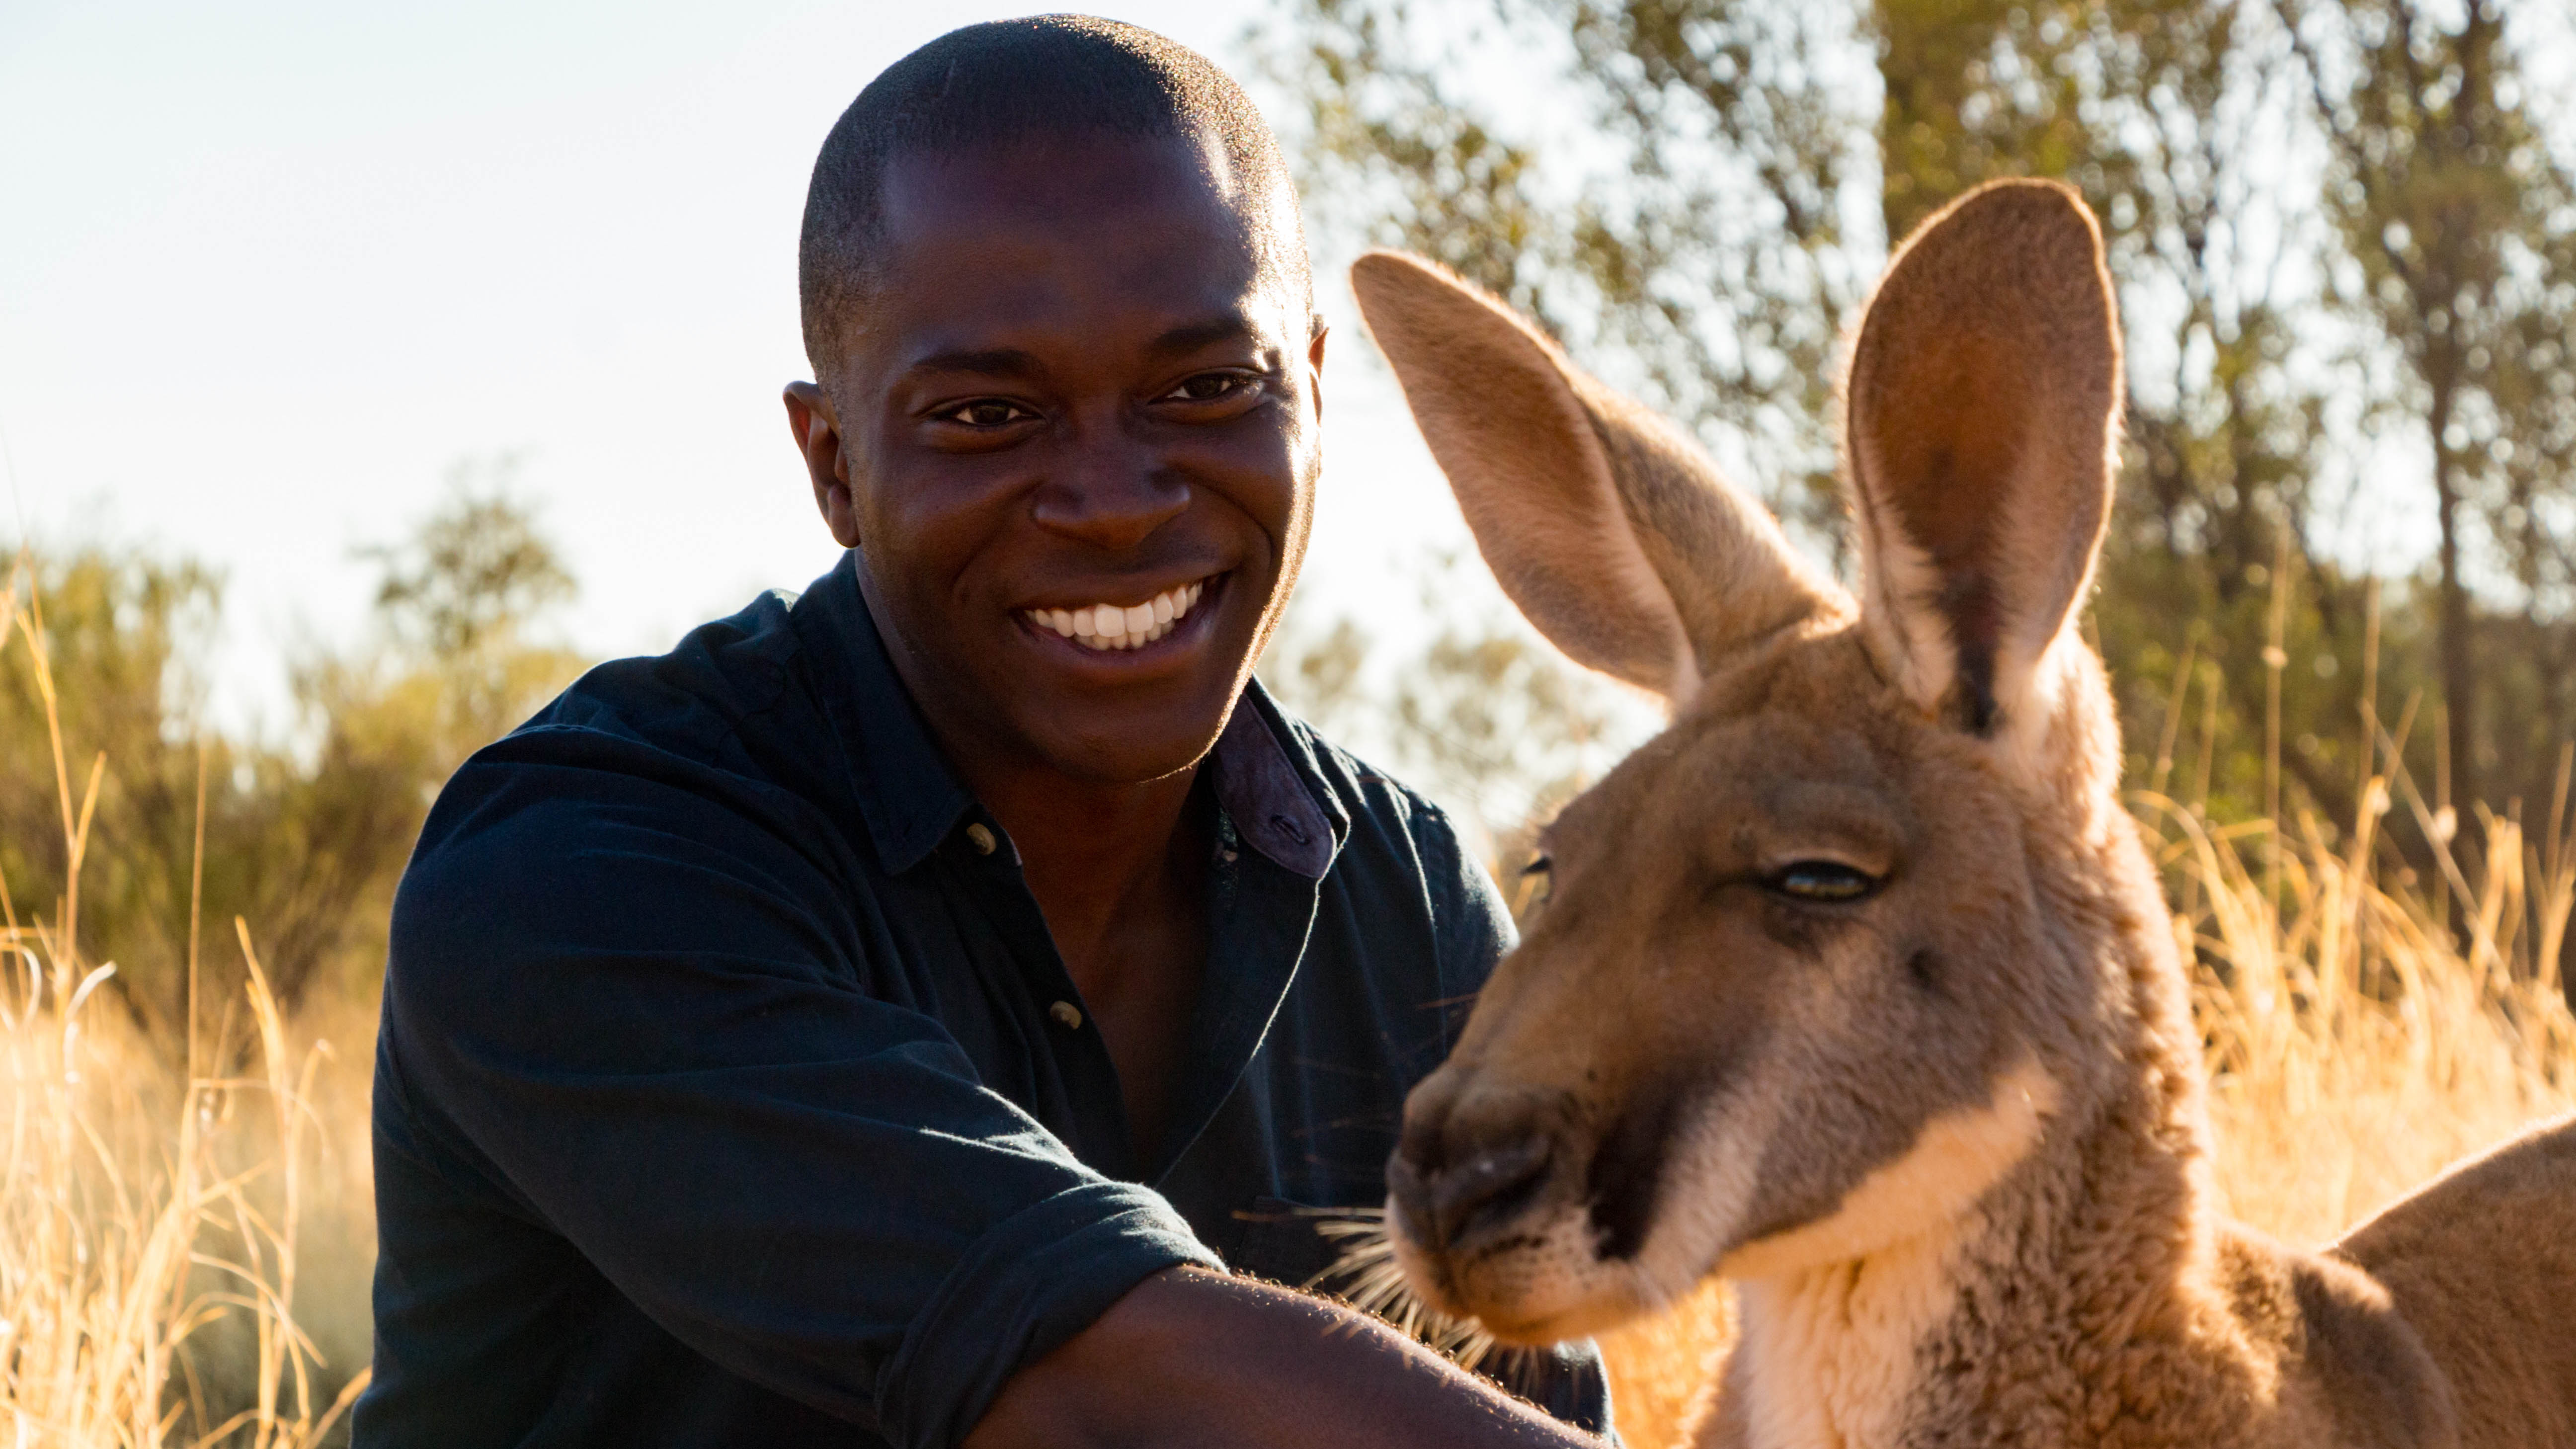 LIFE: FIRST STEPS, Episode 101 - Patrickaryee with a kangaroo in Austrailia